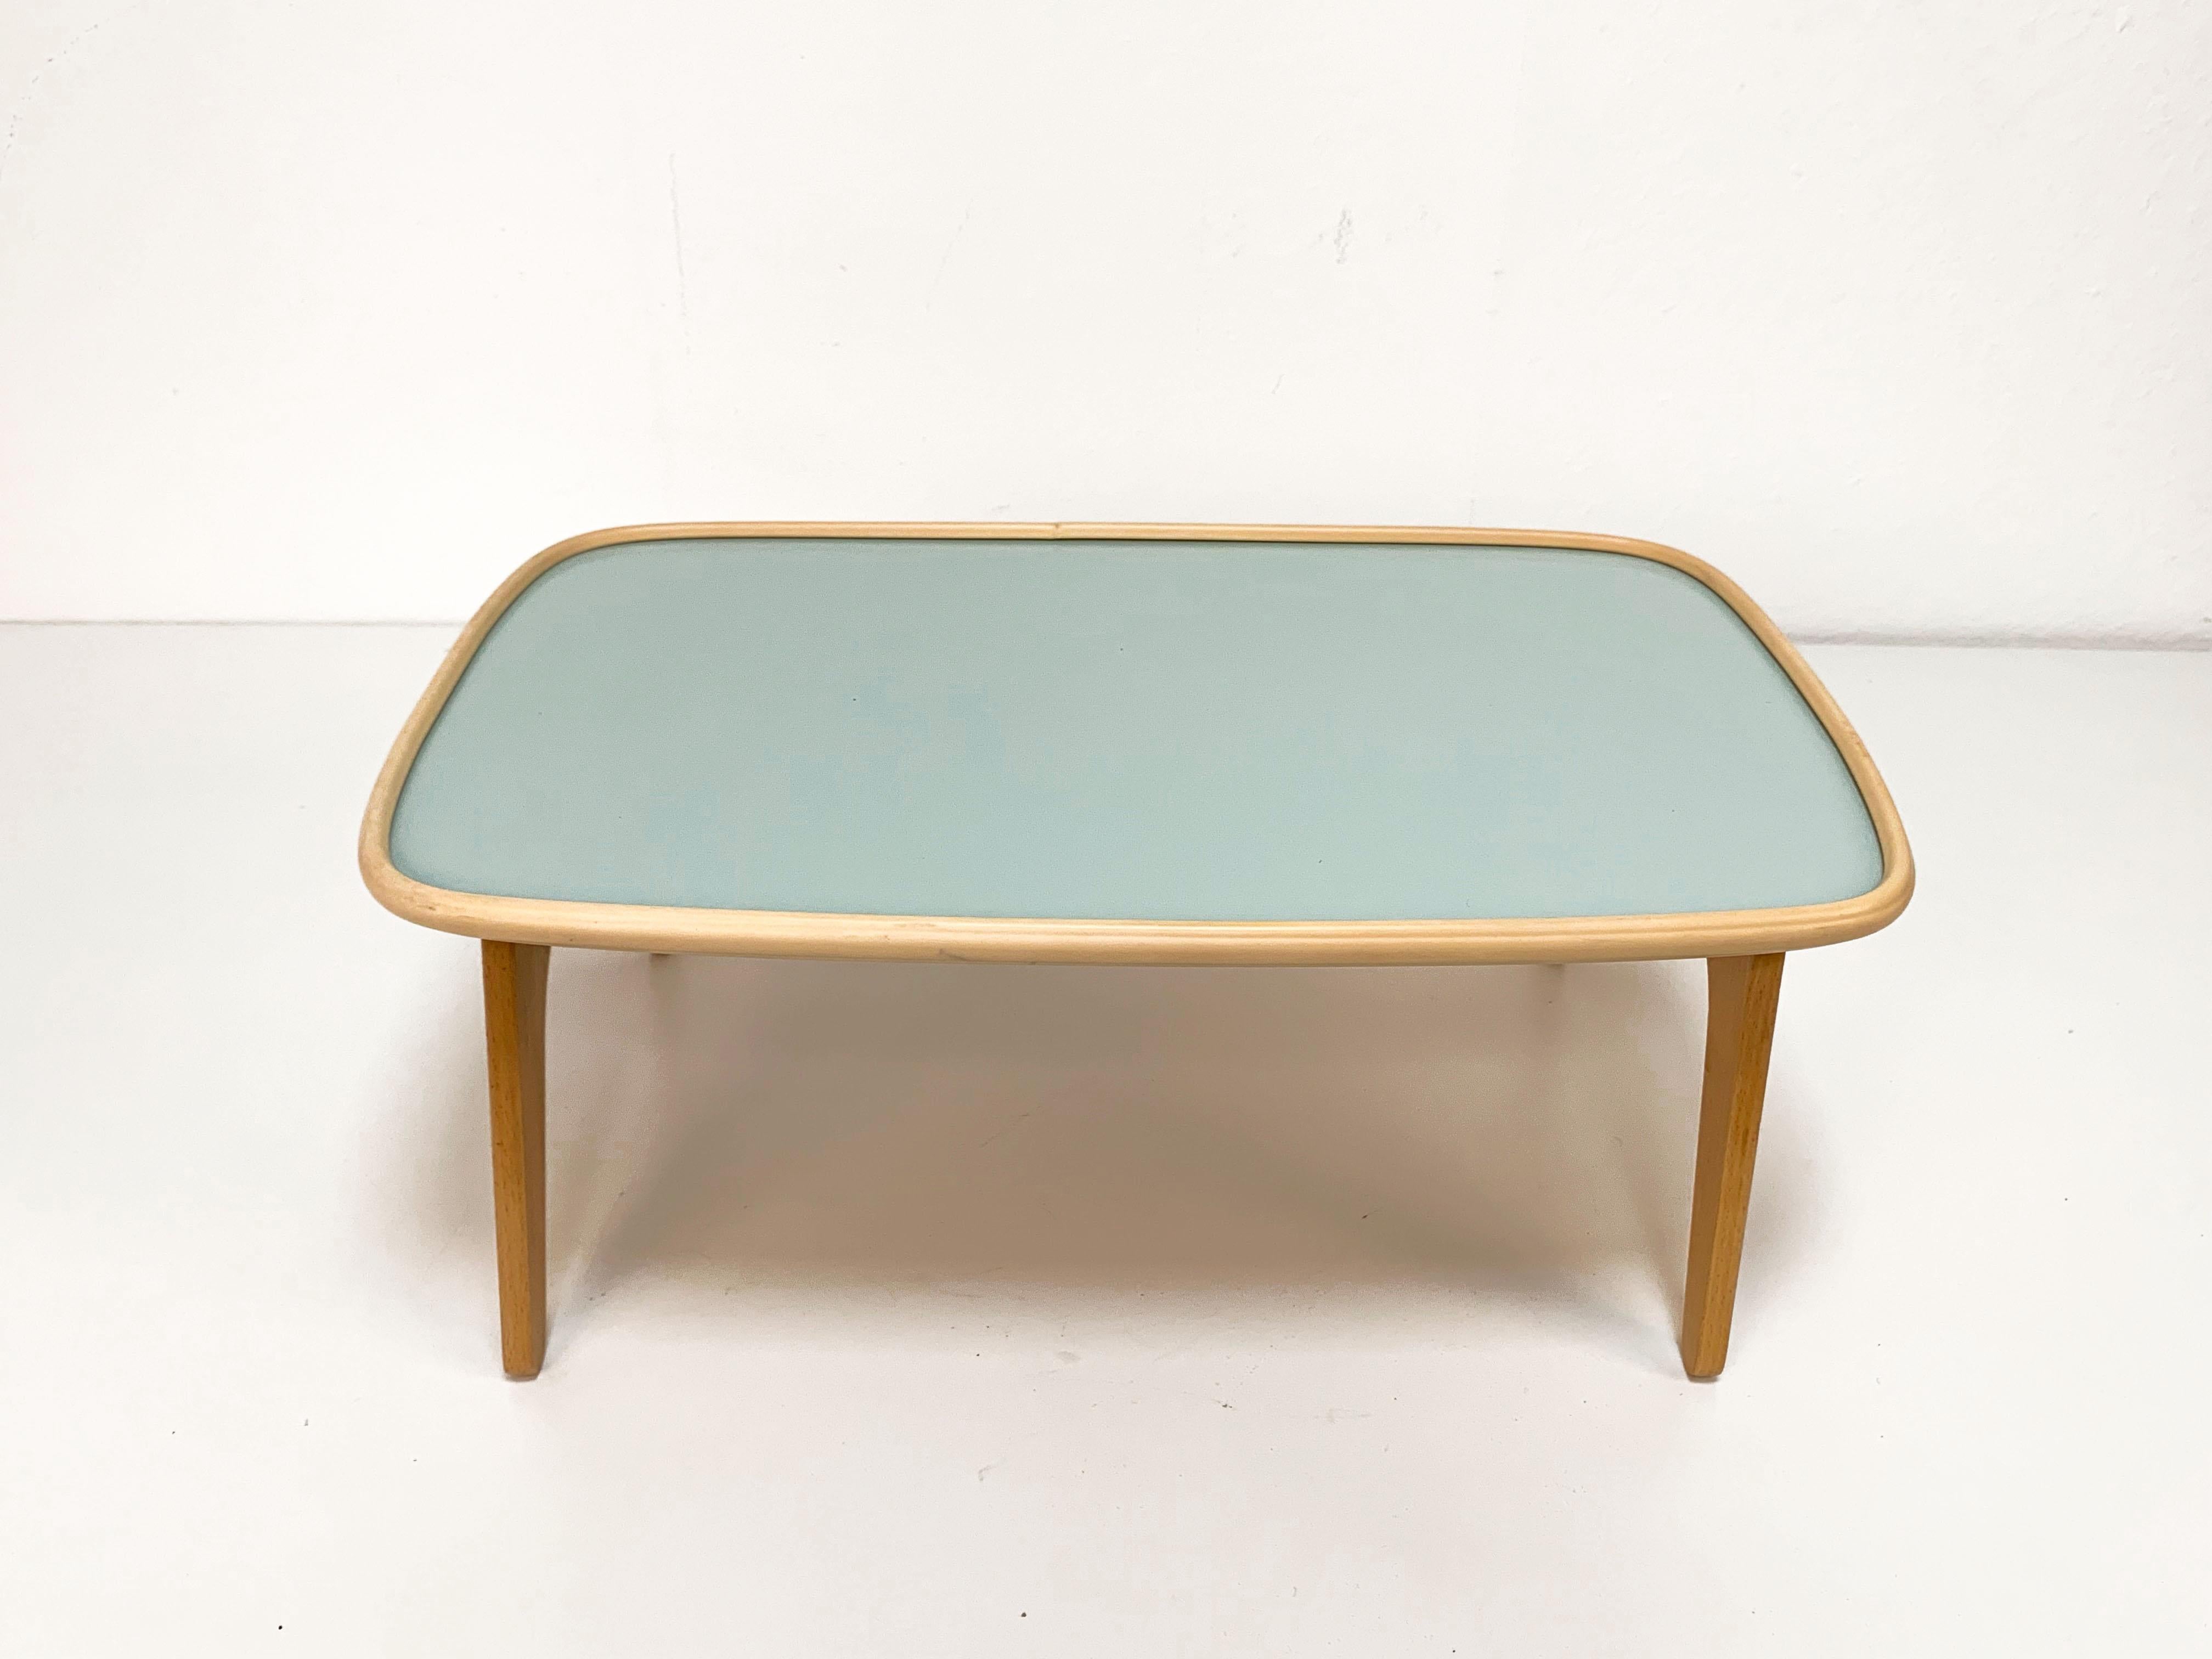 Folding and Adjustable Bed Tray, Laminated Wood, Fratelli Reguitti, Italy, 1950s For Sale 1